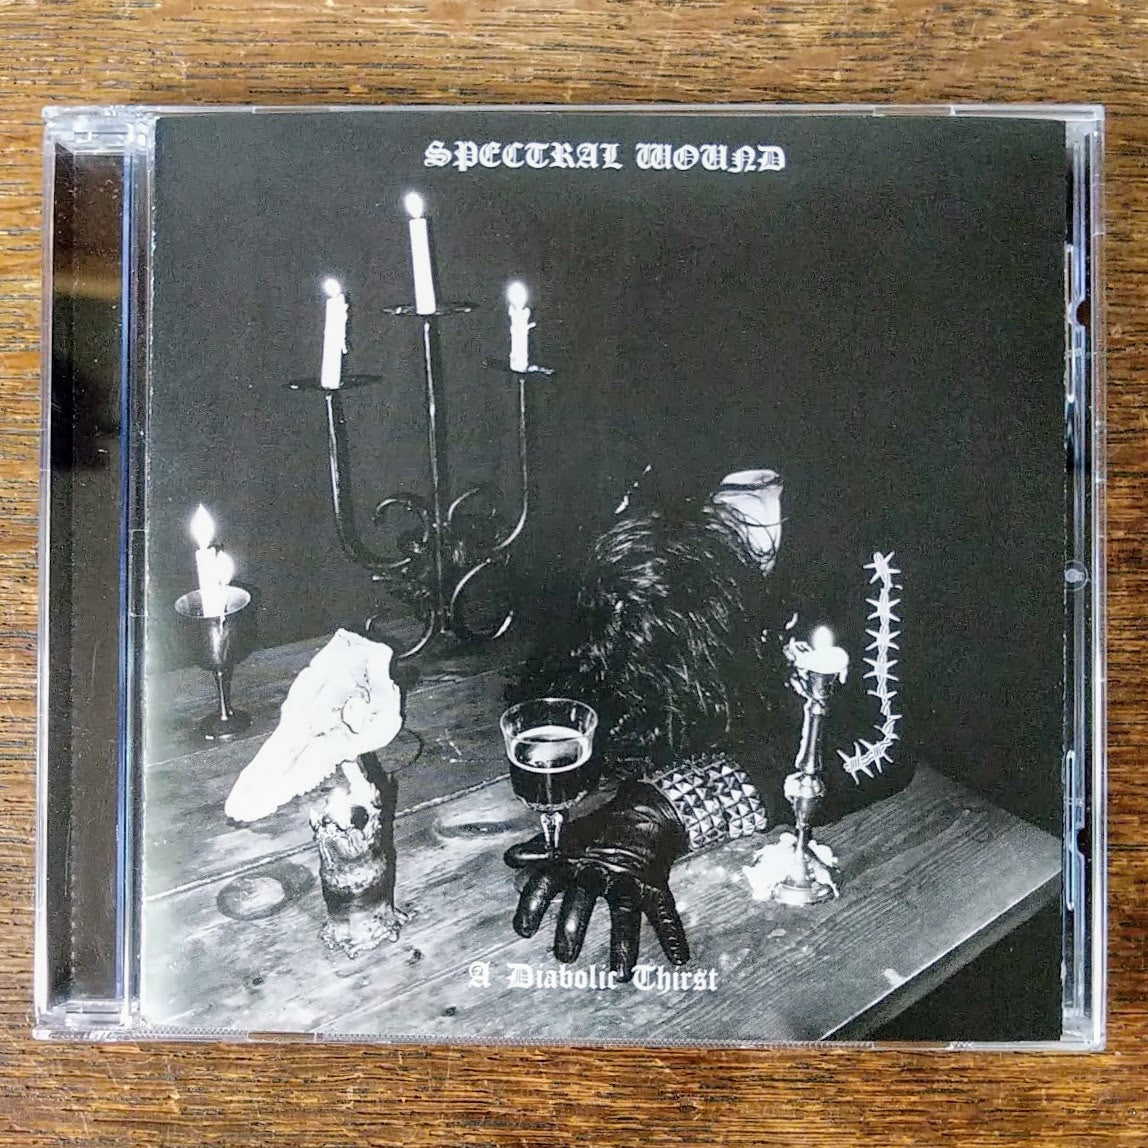 [SOLD OUT] SPECTRAL WOUND "A Diabolical Thirst" CD